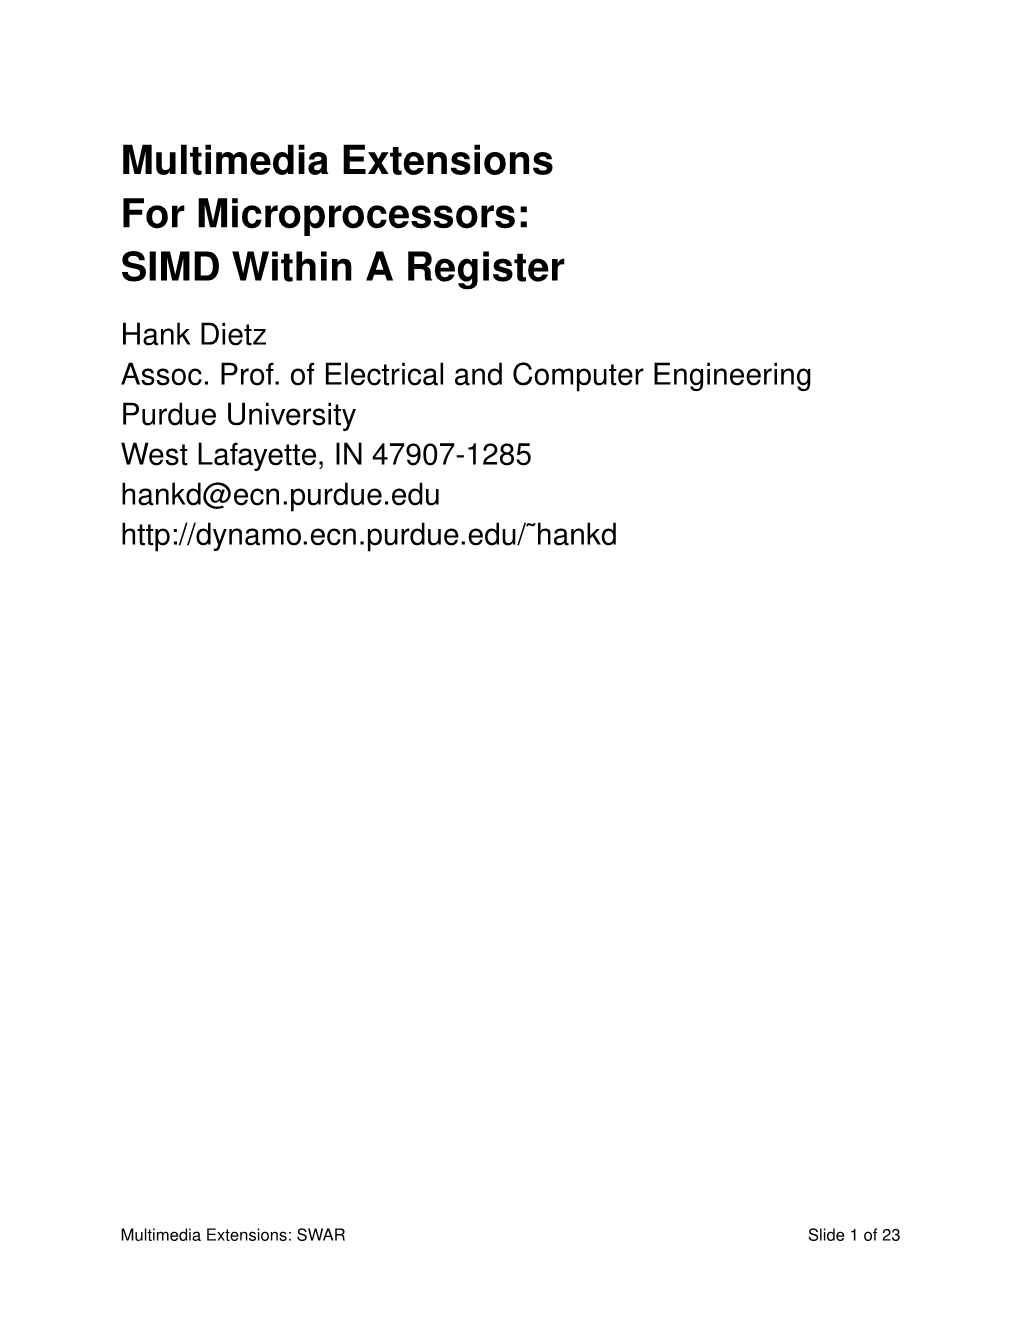 Multimedia Extensions for Microprocessors: SIMD Within a Register